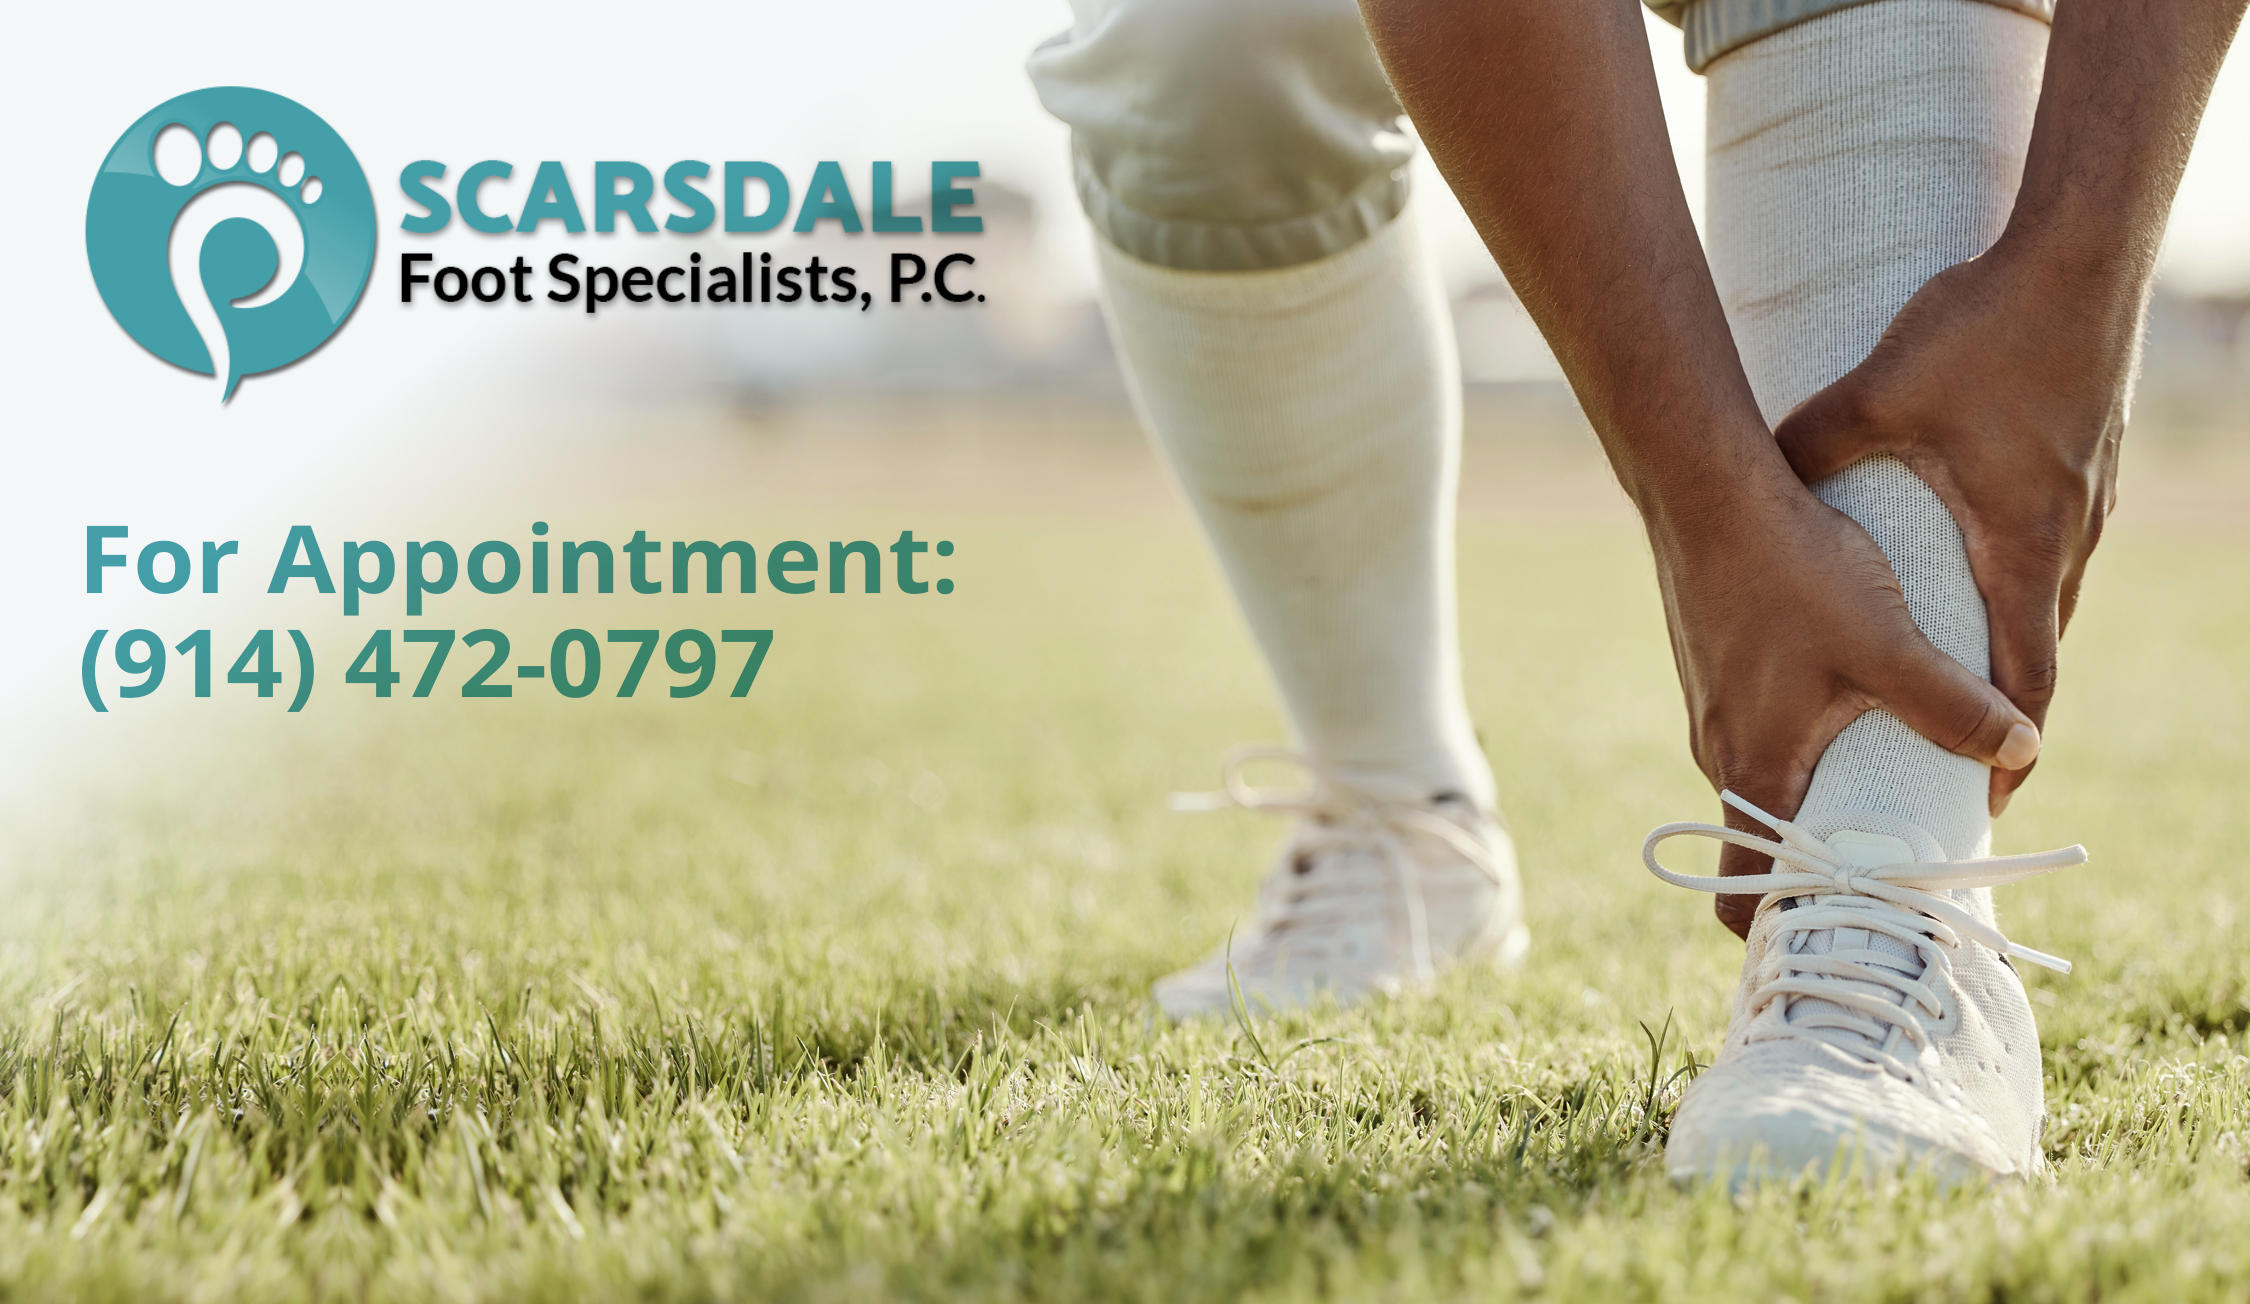 Scarsdale Foot Specialists